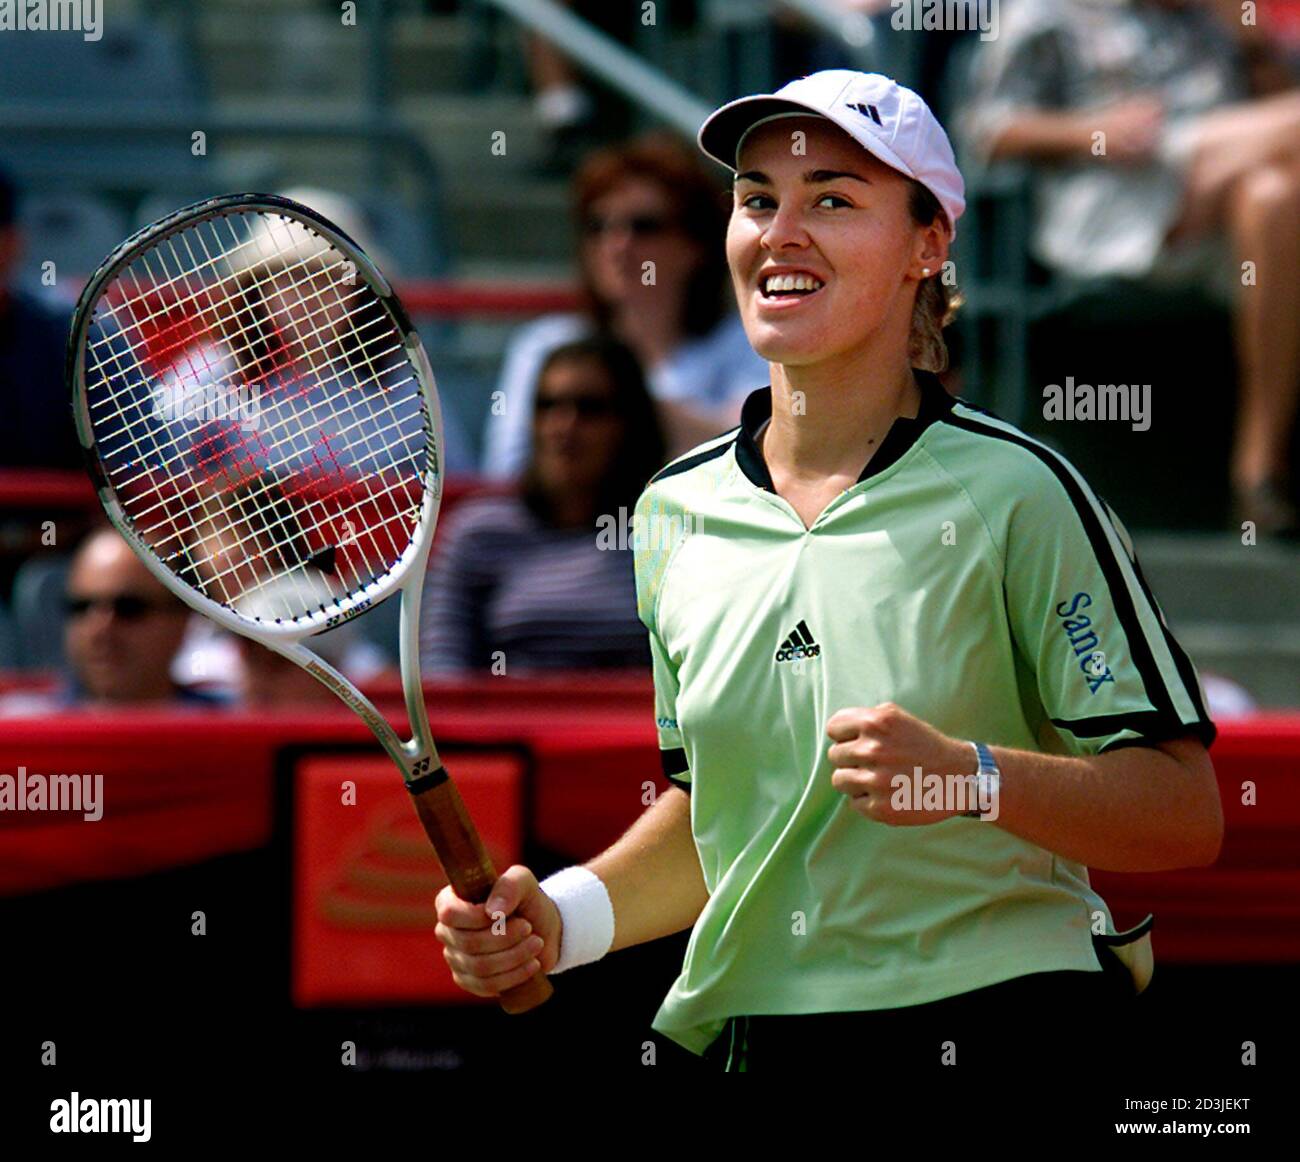 Martina Hingis 2000 High Resolution Stock Photography and Images - Alamy